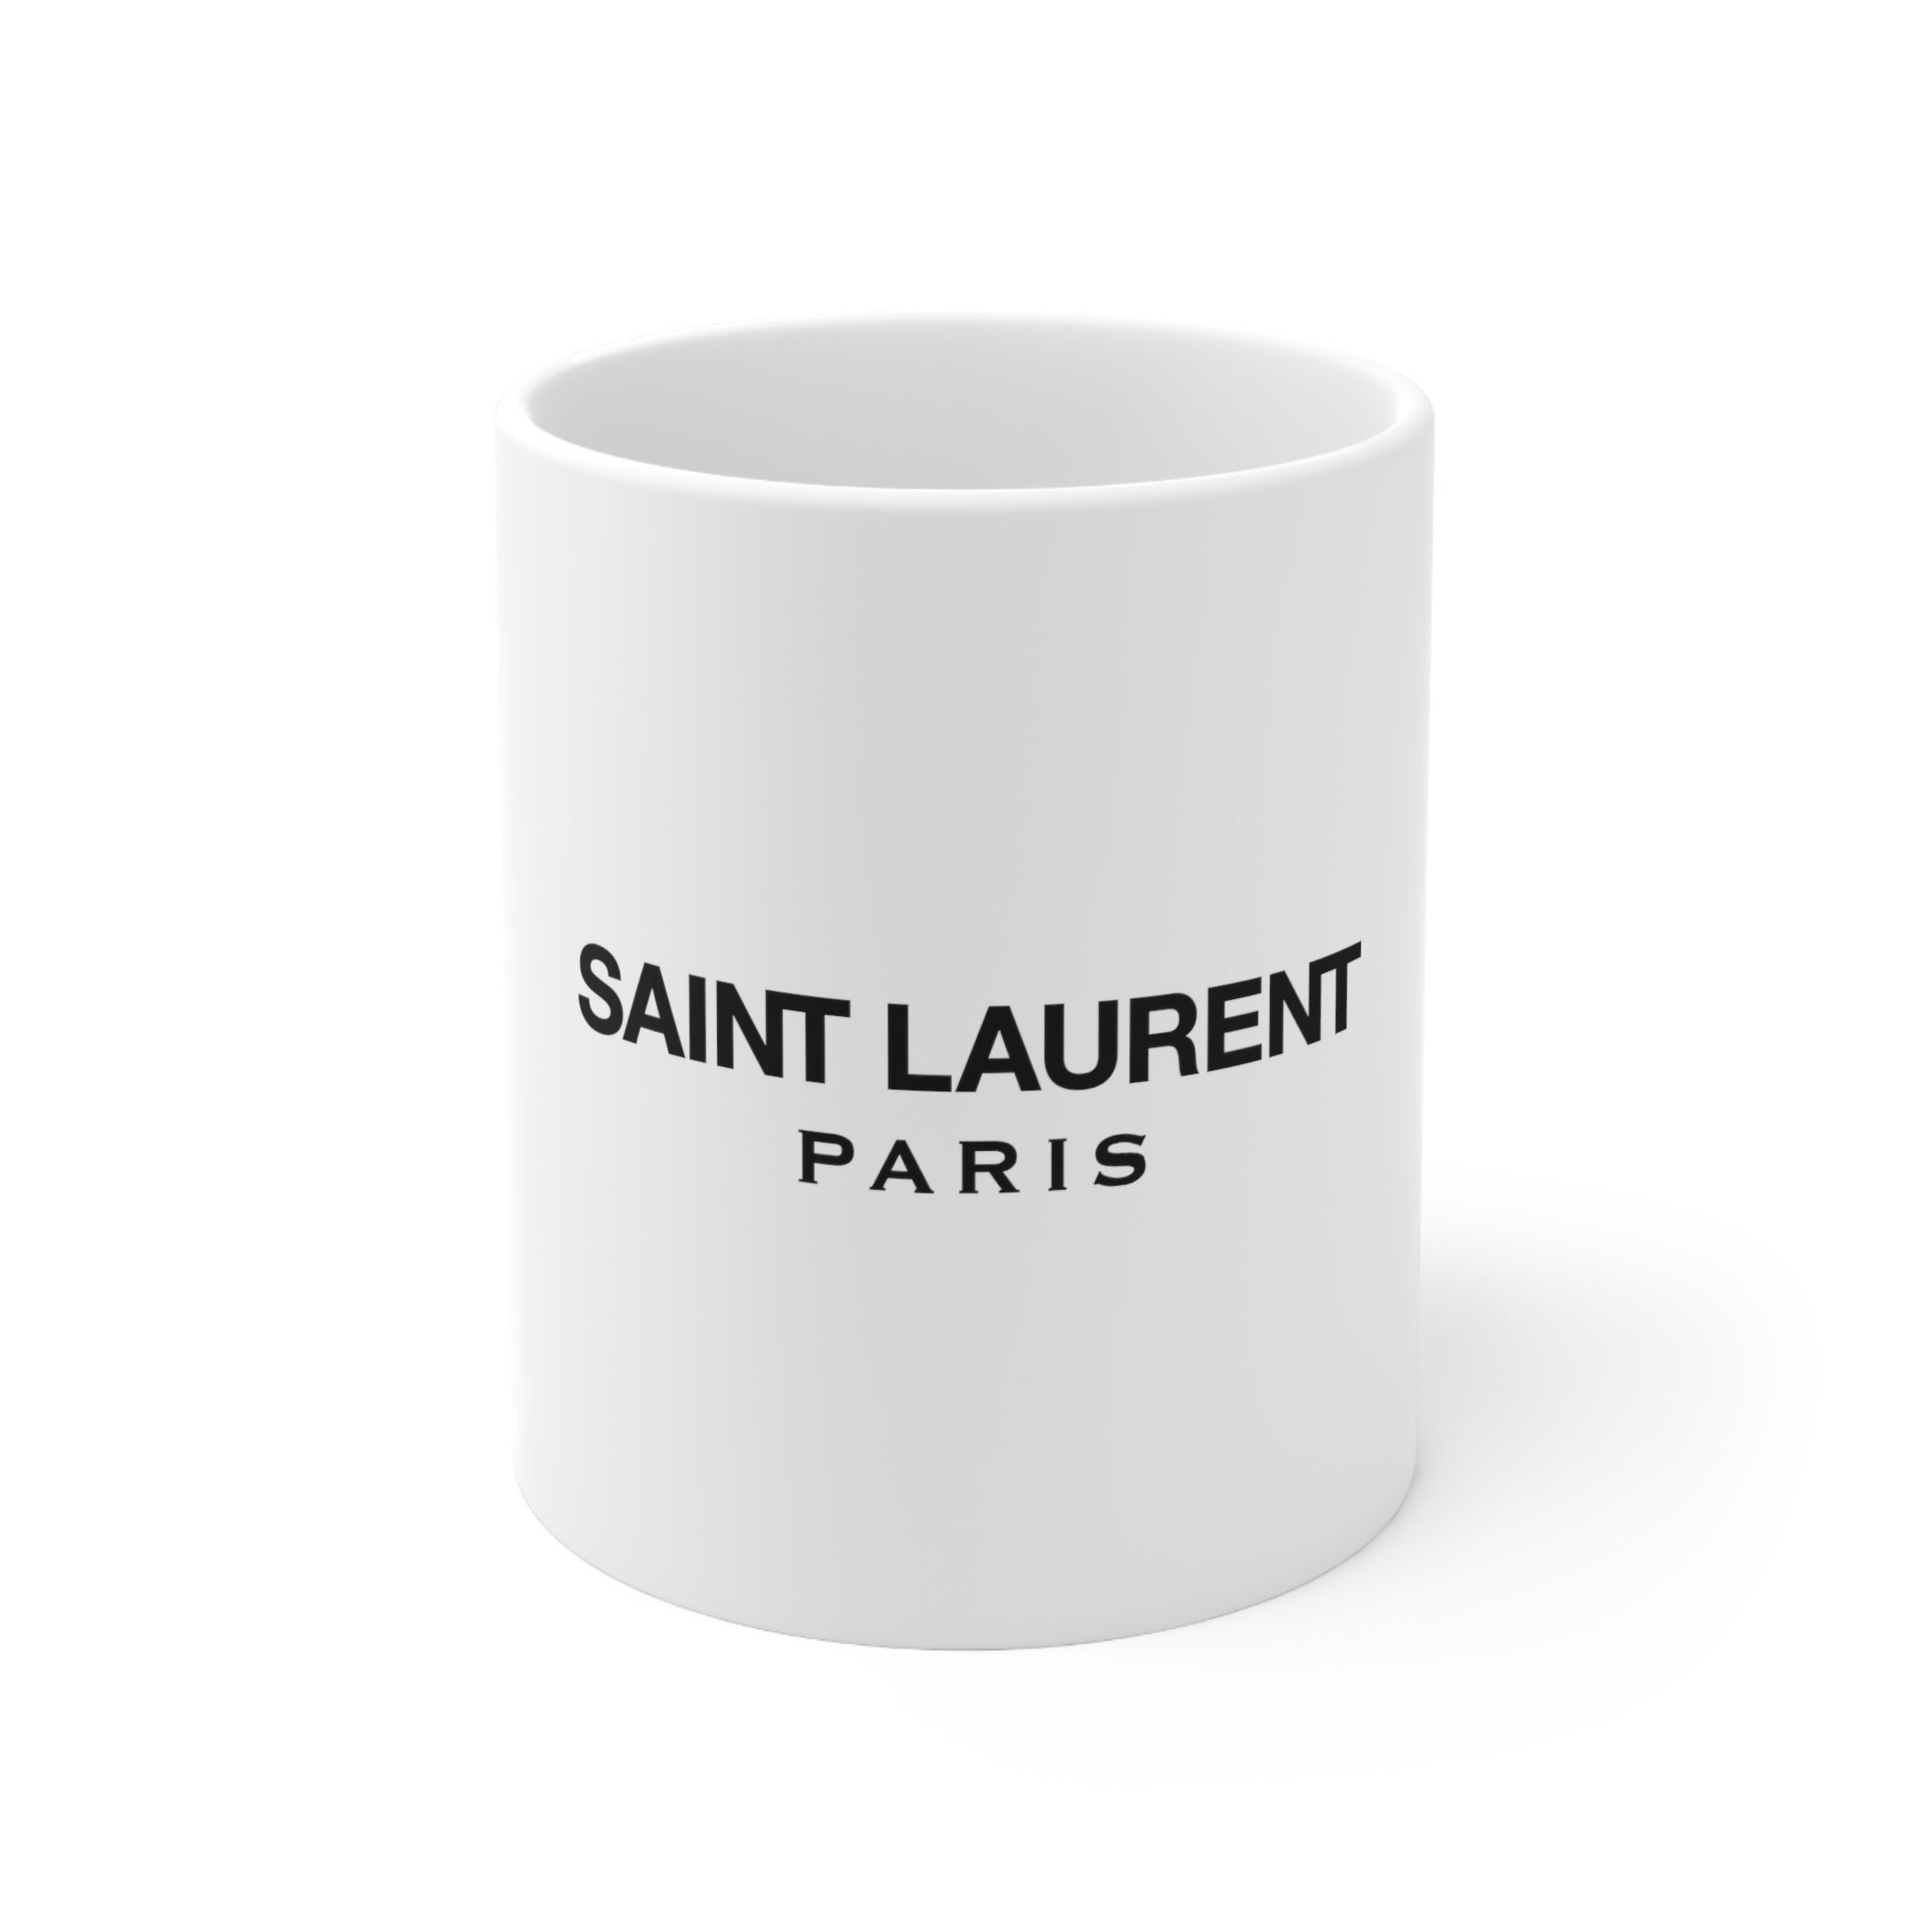 Affordable dupes of Anne, Heart's YSL coffee cup